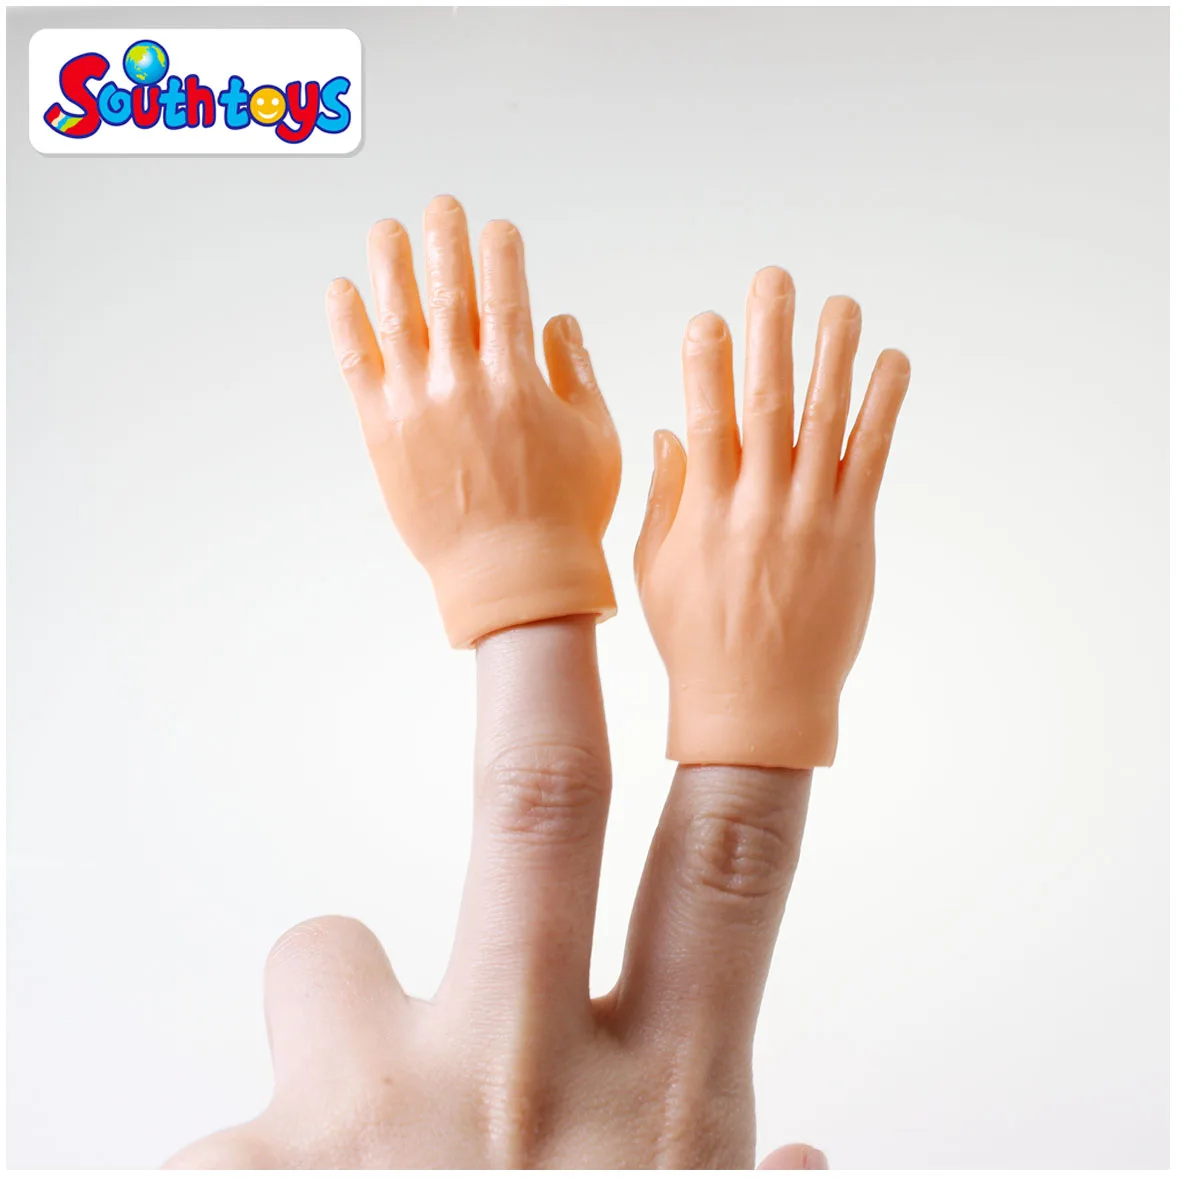 
Set of 10pcs Left or Right Tiny Hands Toy Finger Hands Finger Puppets 